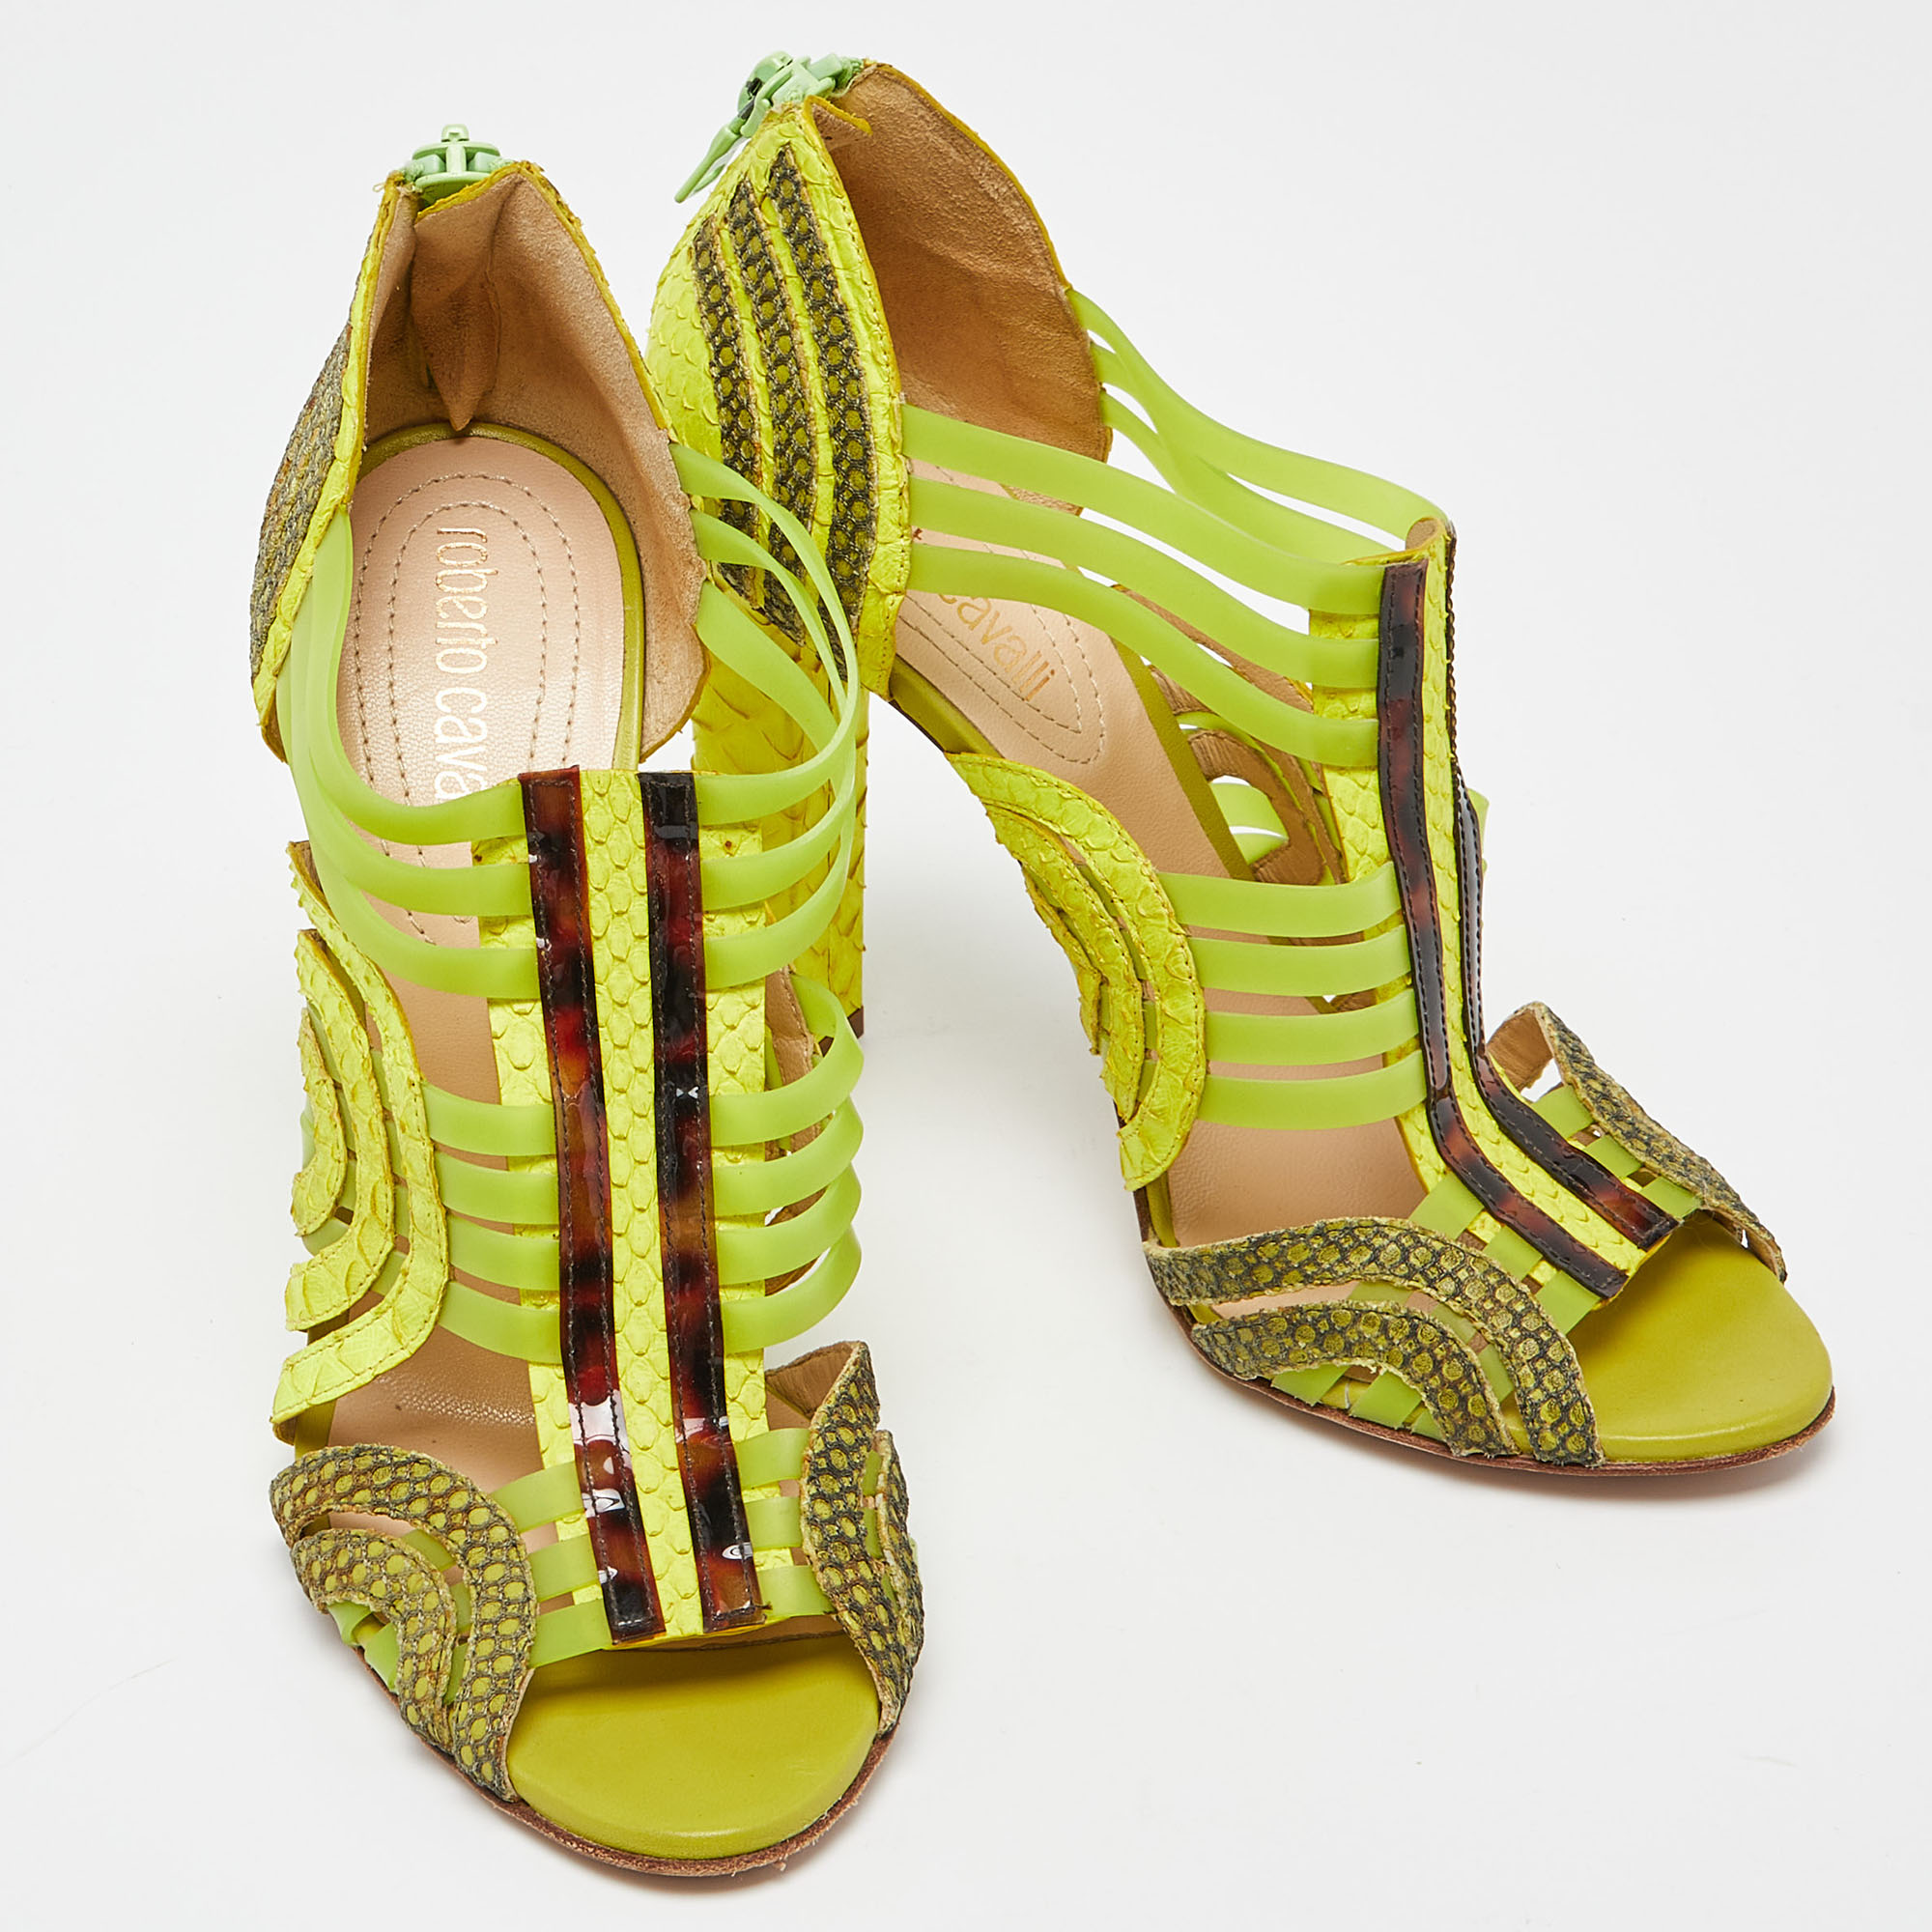 Roberto Cavalli Green Watersnake Leather And Jelly Cage Open Toe Sandals Size 38.5